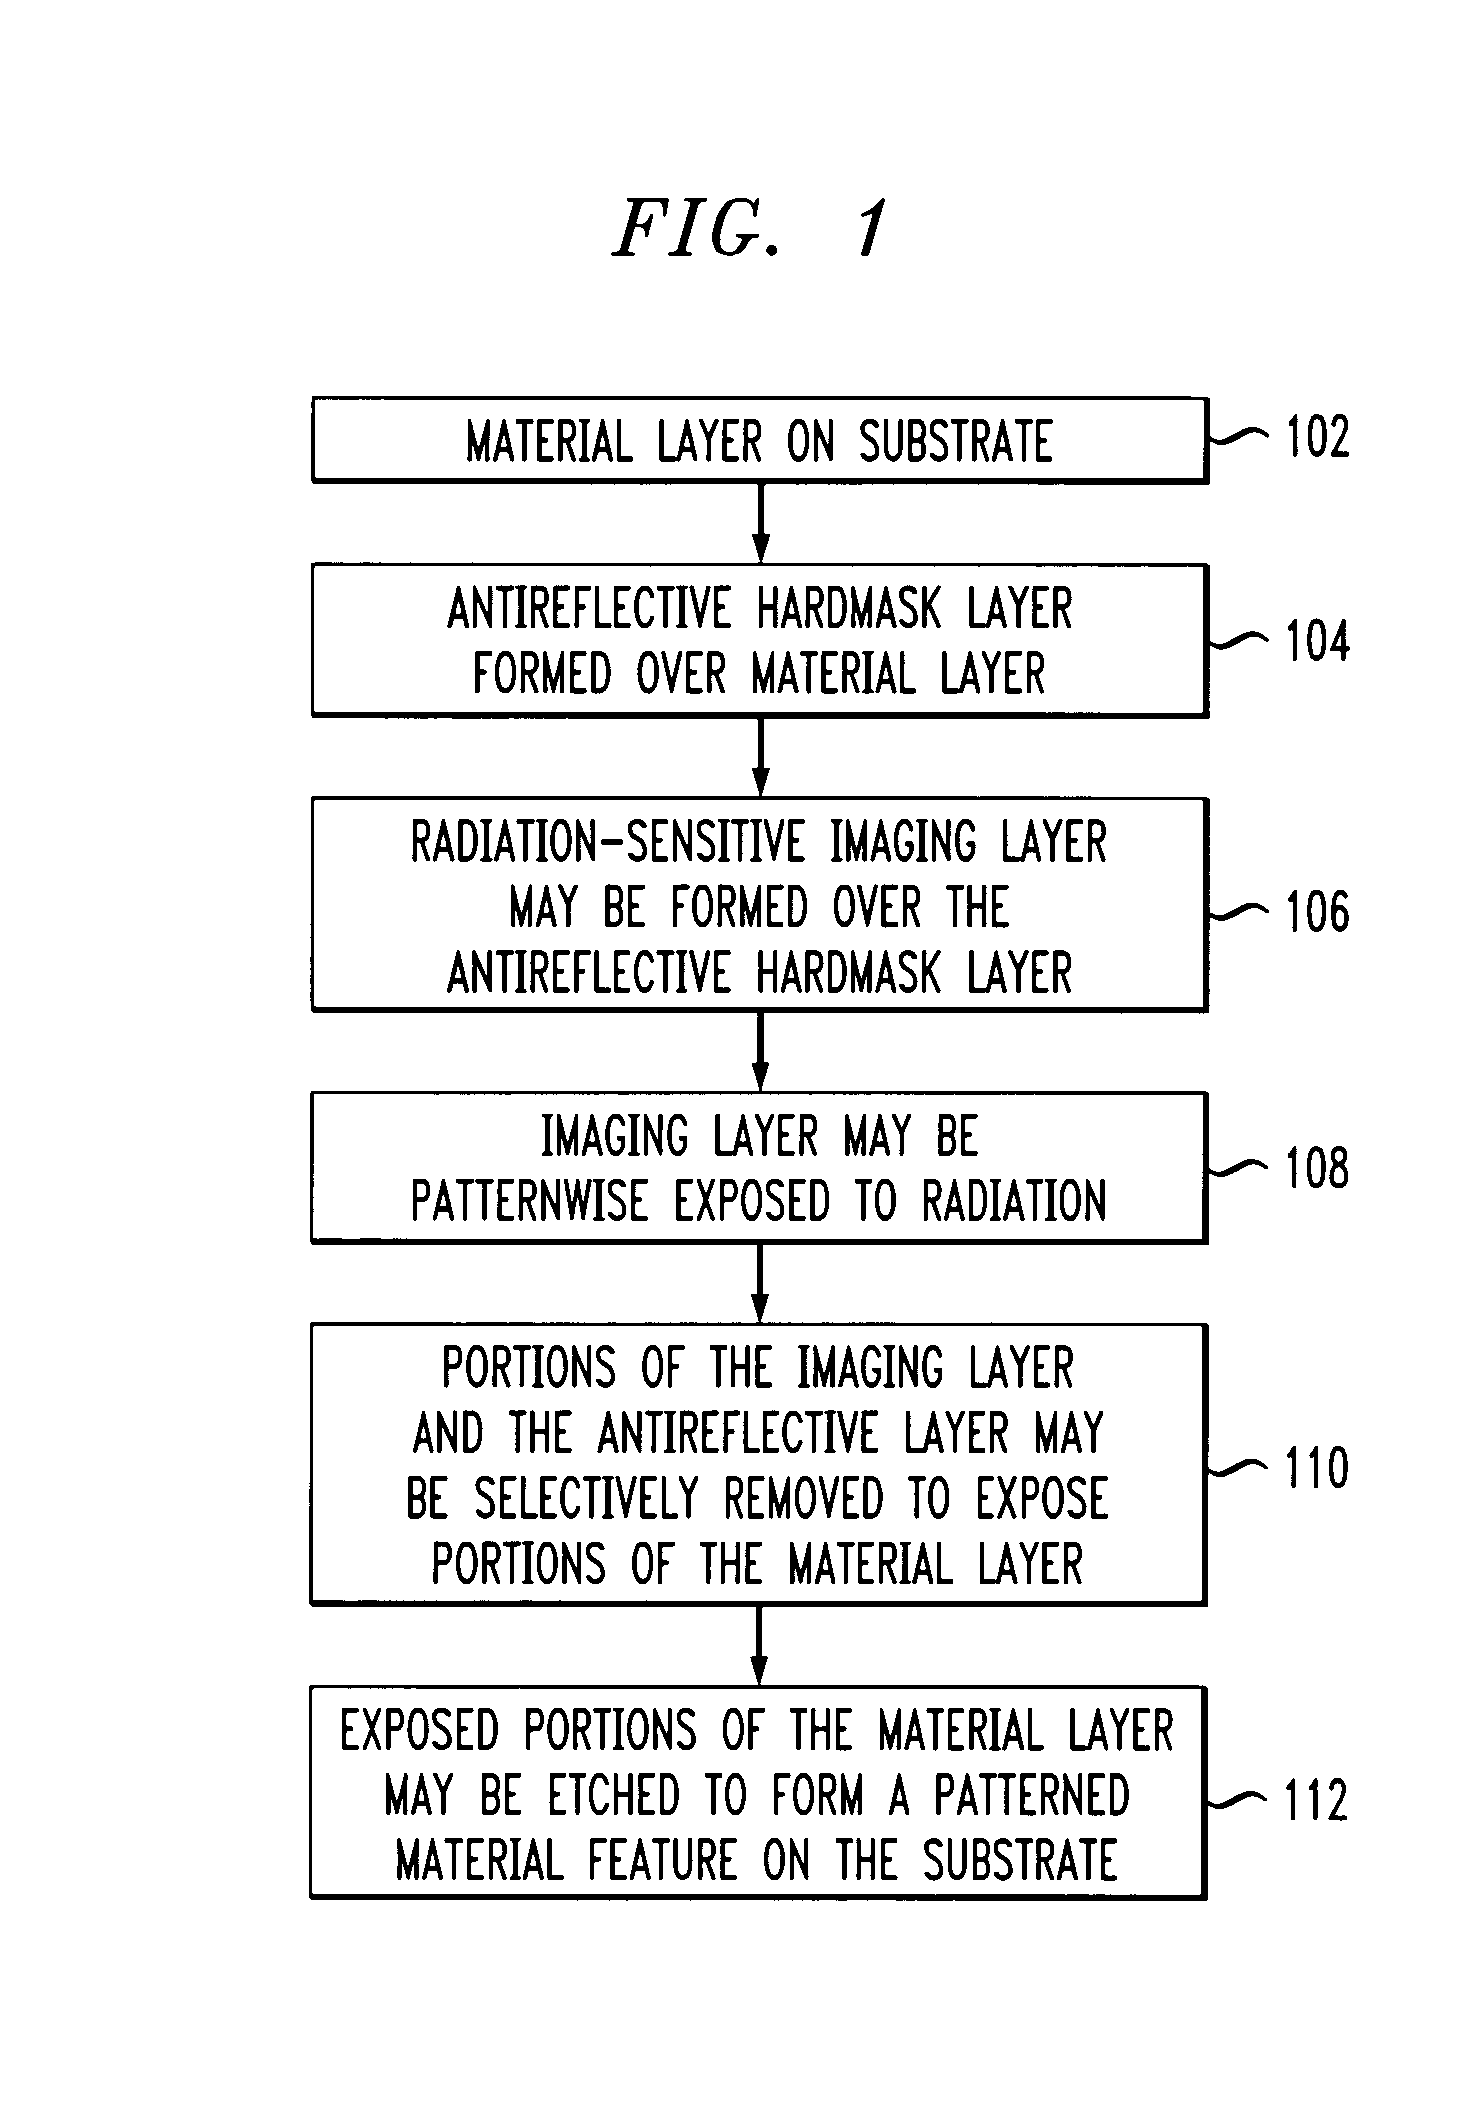 Lithographic antireflective hardmask compositions and uses thereof